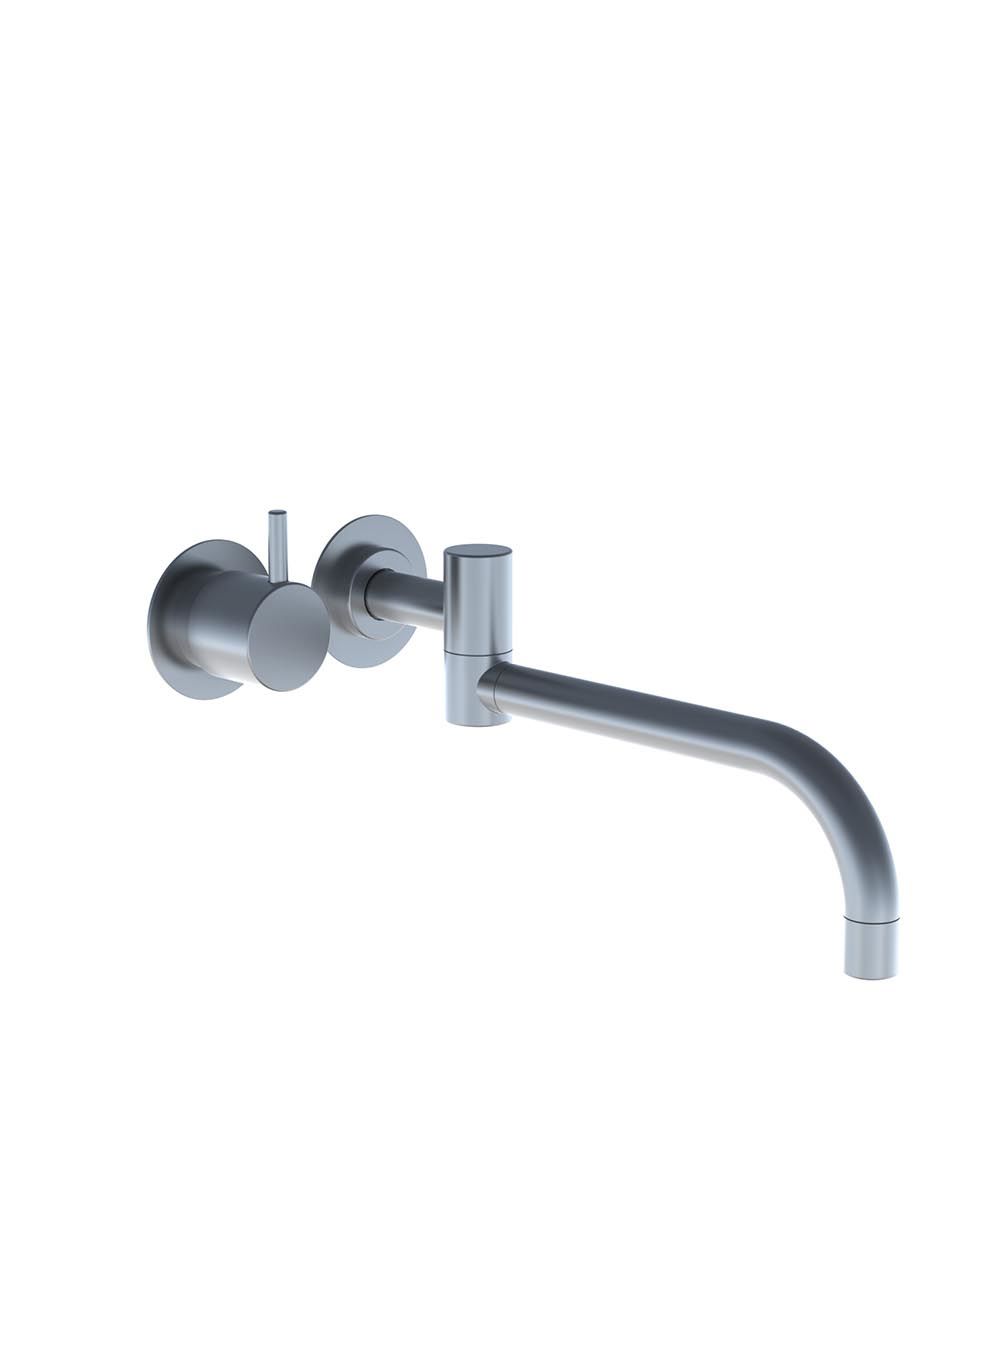 931: Build-in single feed with ceramic disc technology.931UP = Valve 900.931AP = Handle NR17, 250 mm doub